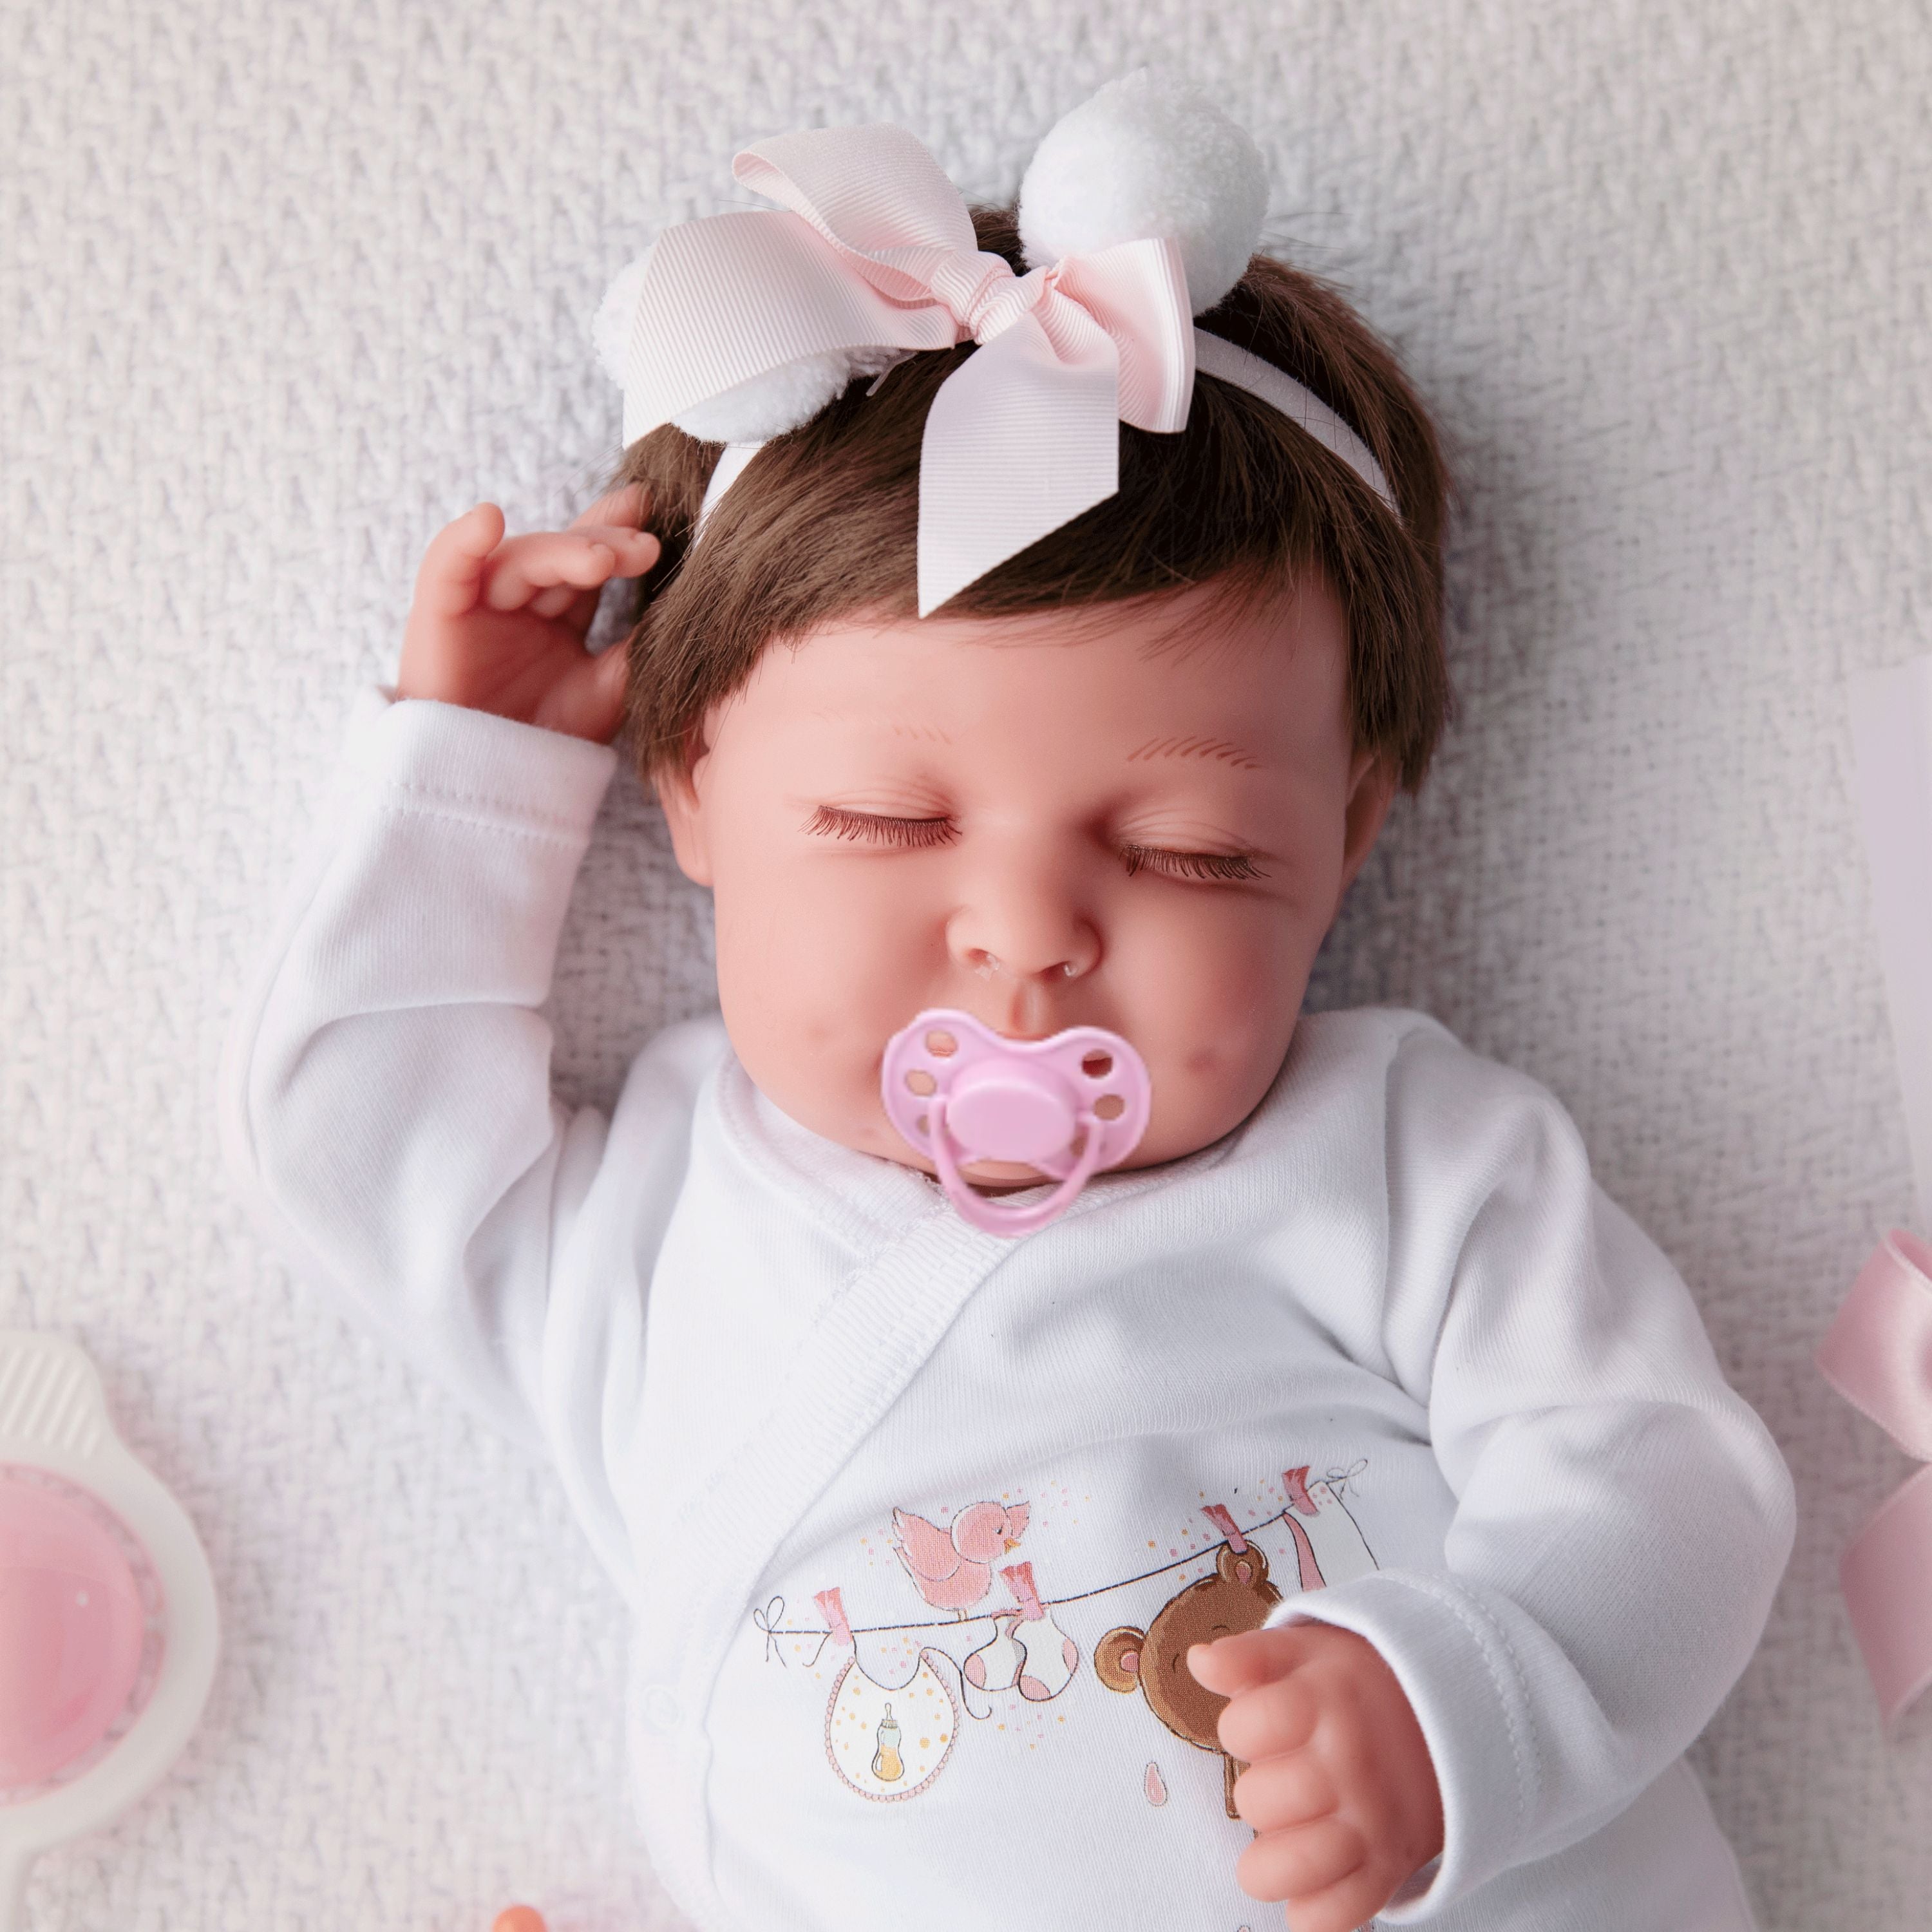 Reborn Baby Doll Reborn Star - 48CM and 2KG - SILICONE VINYL, FALLING HEAD WITH HAIR AND CLOSED EYES